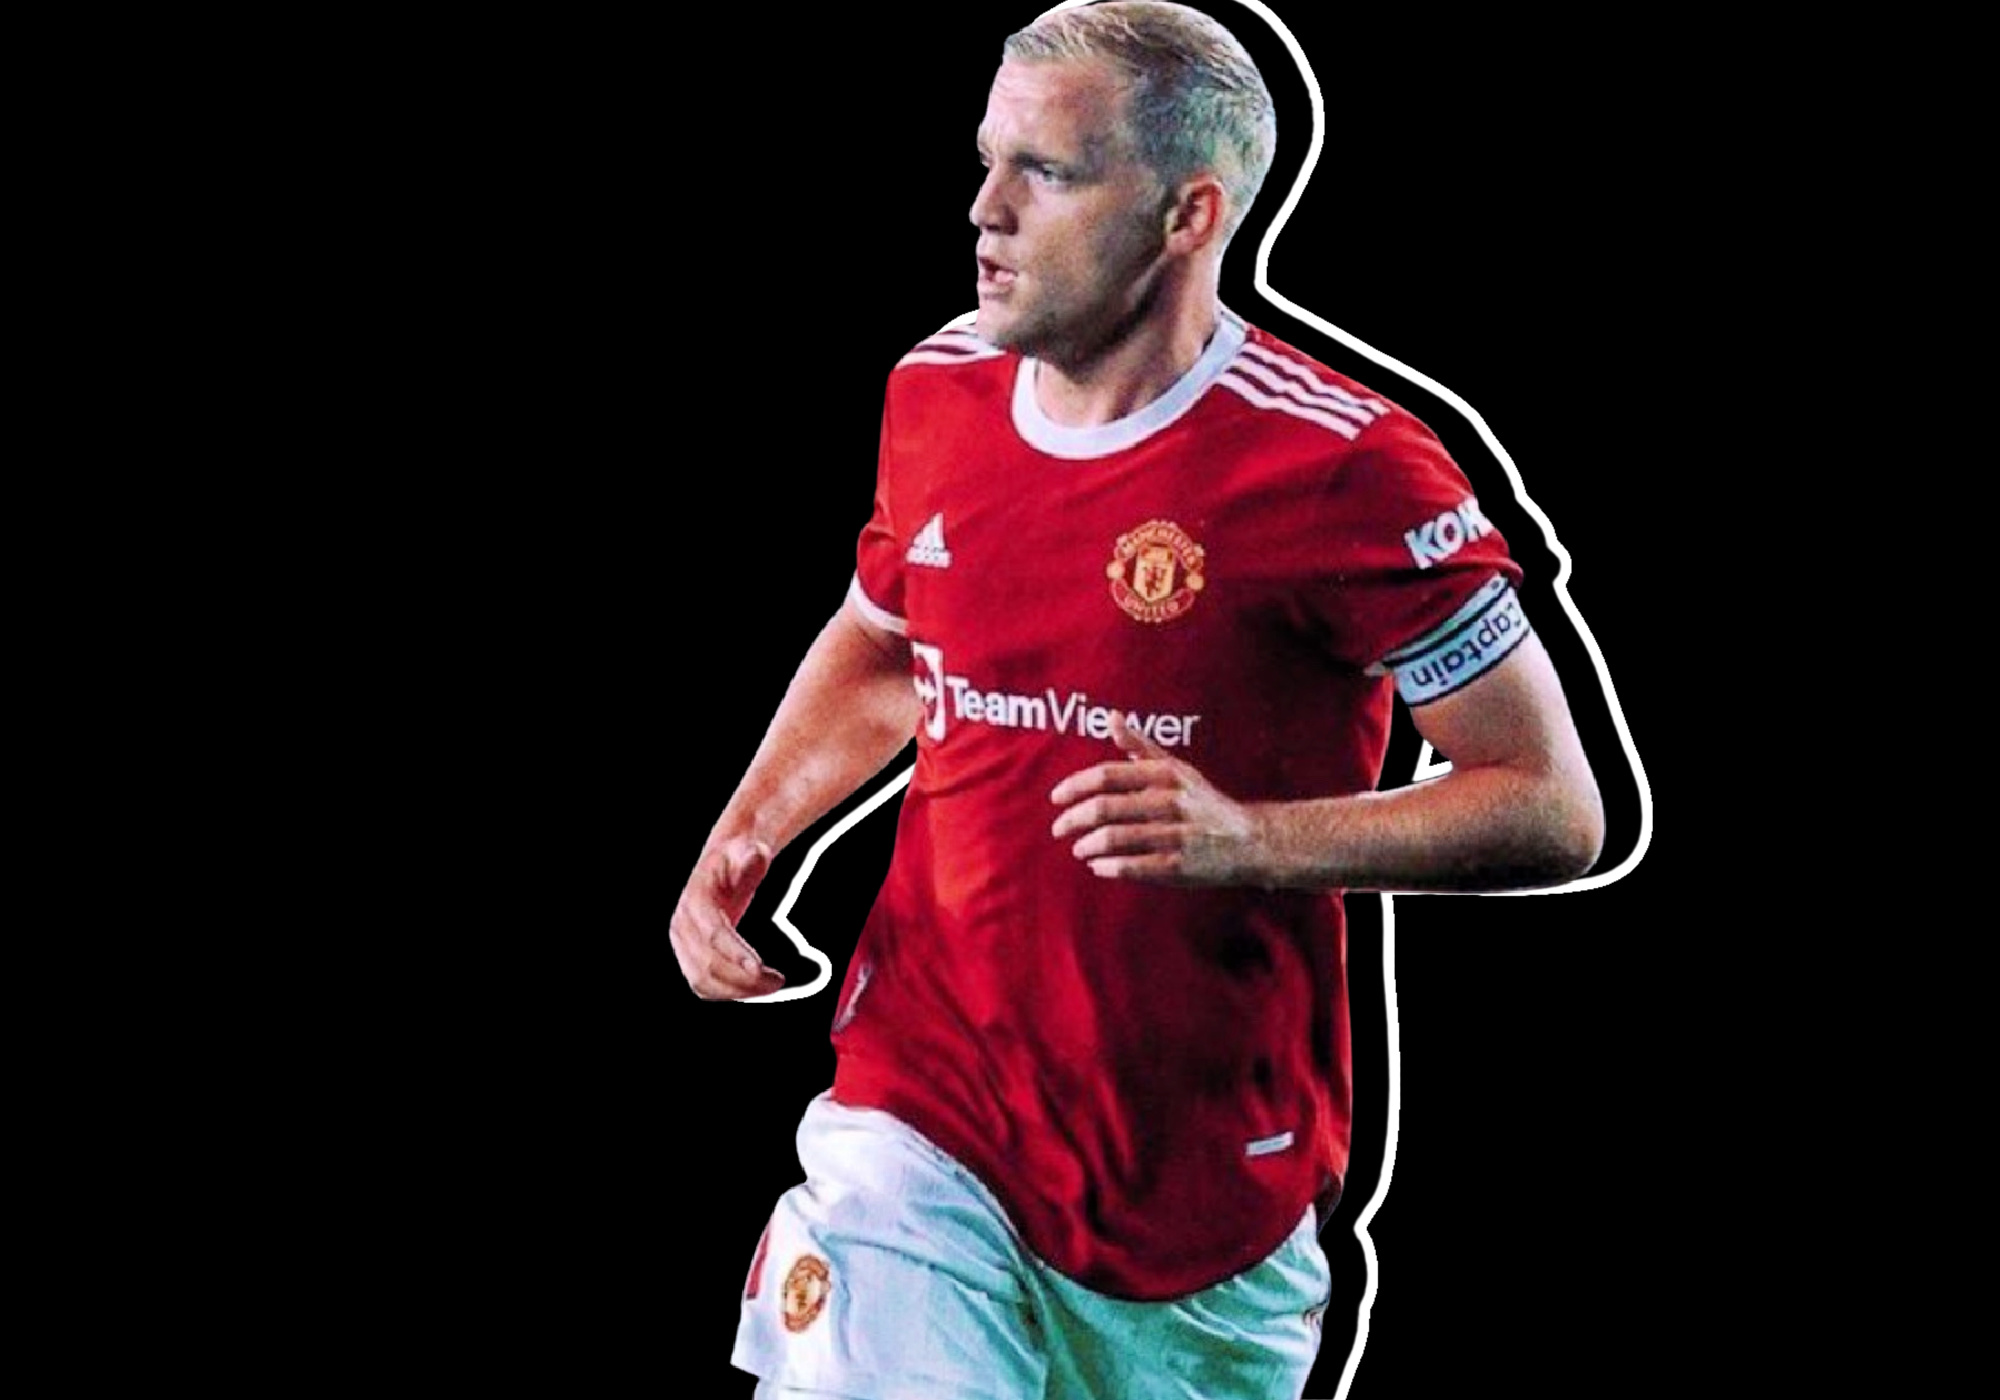 Donny van de Beek has gone through a physical transformation in a bid to revive his Manchester United career